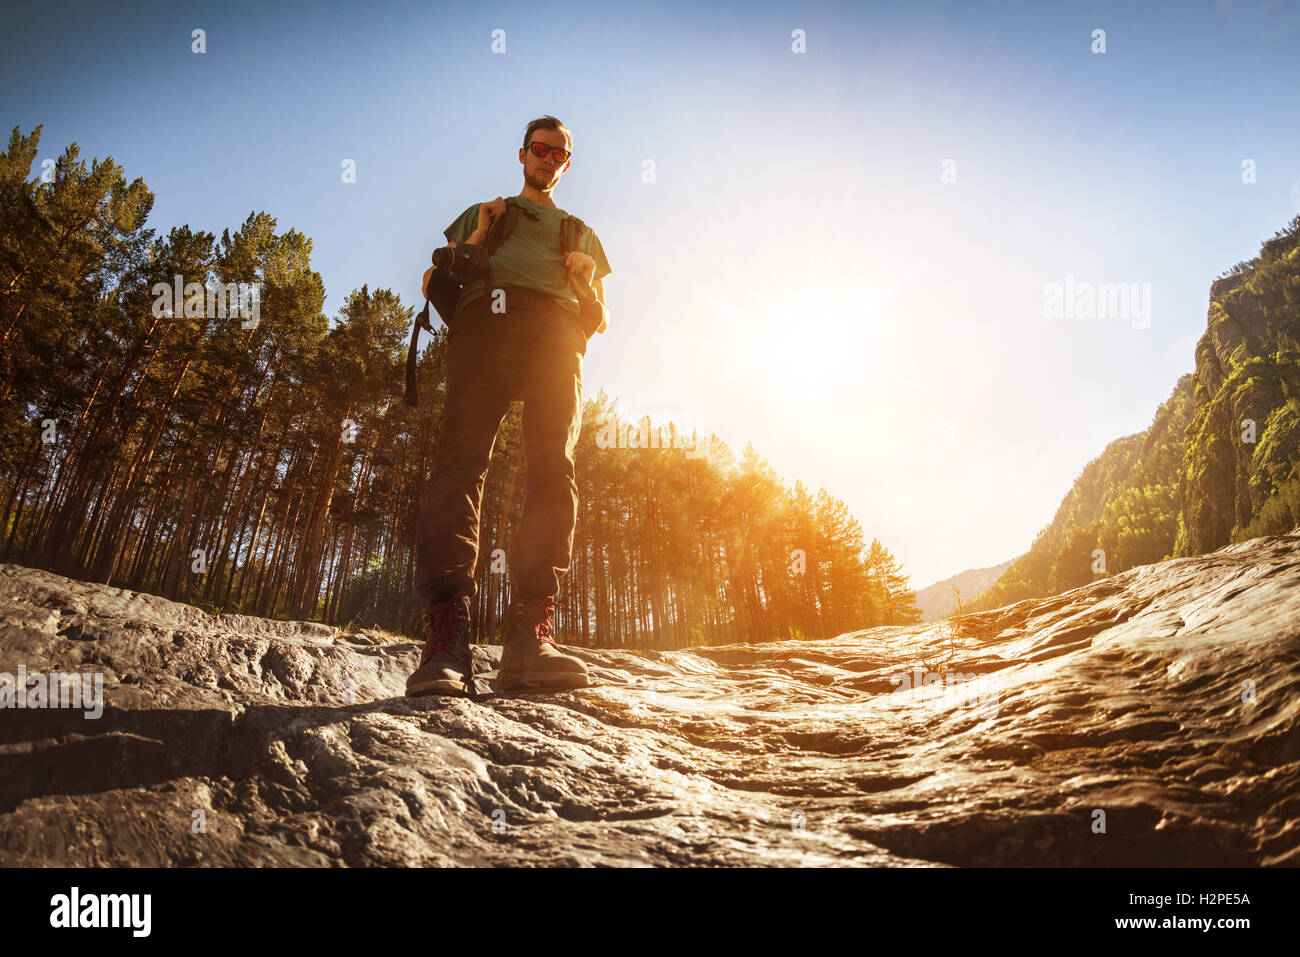 Backpacker stands on fir tree forest backdrop Stock Photo